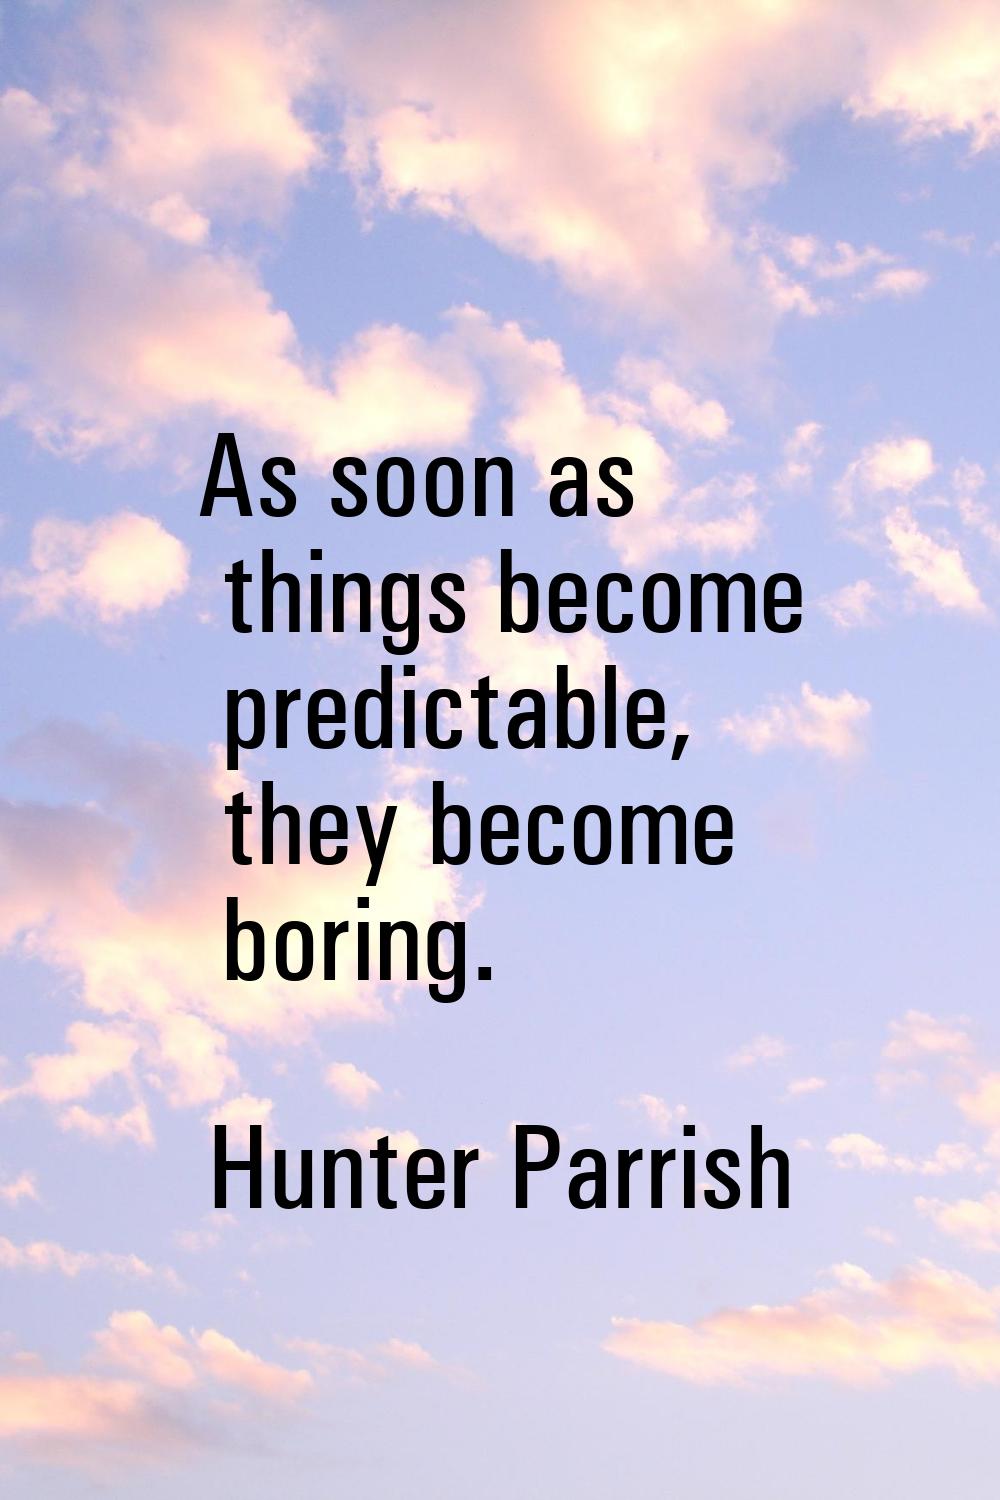 As soon as things become predictable, they become boring.